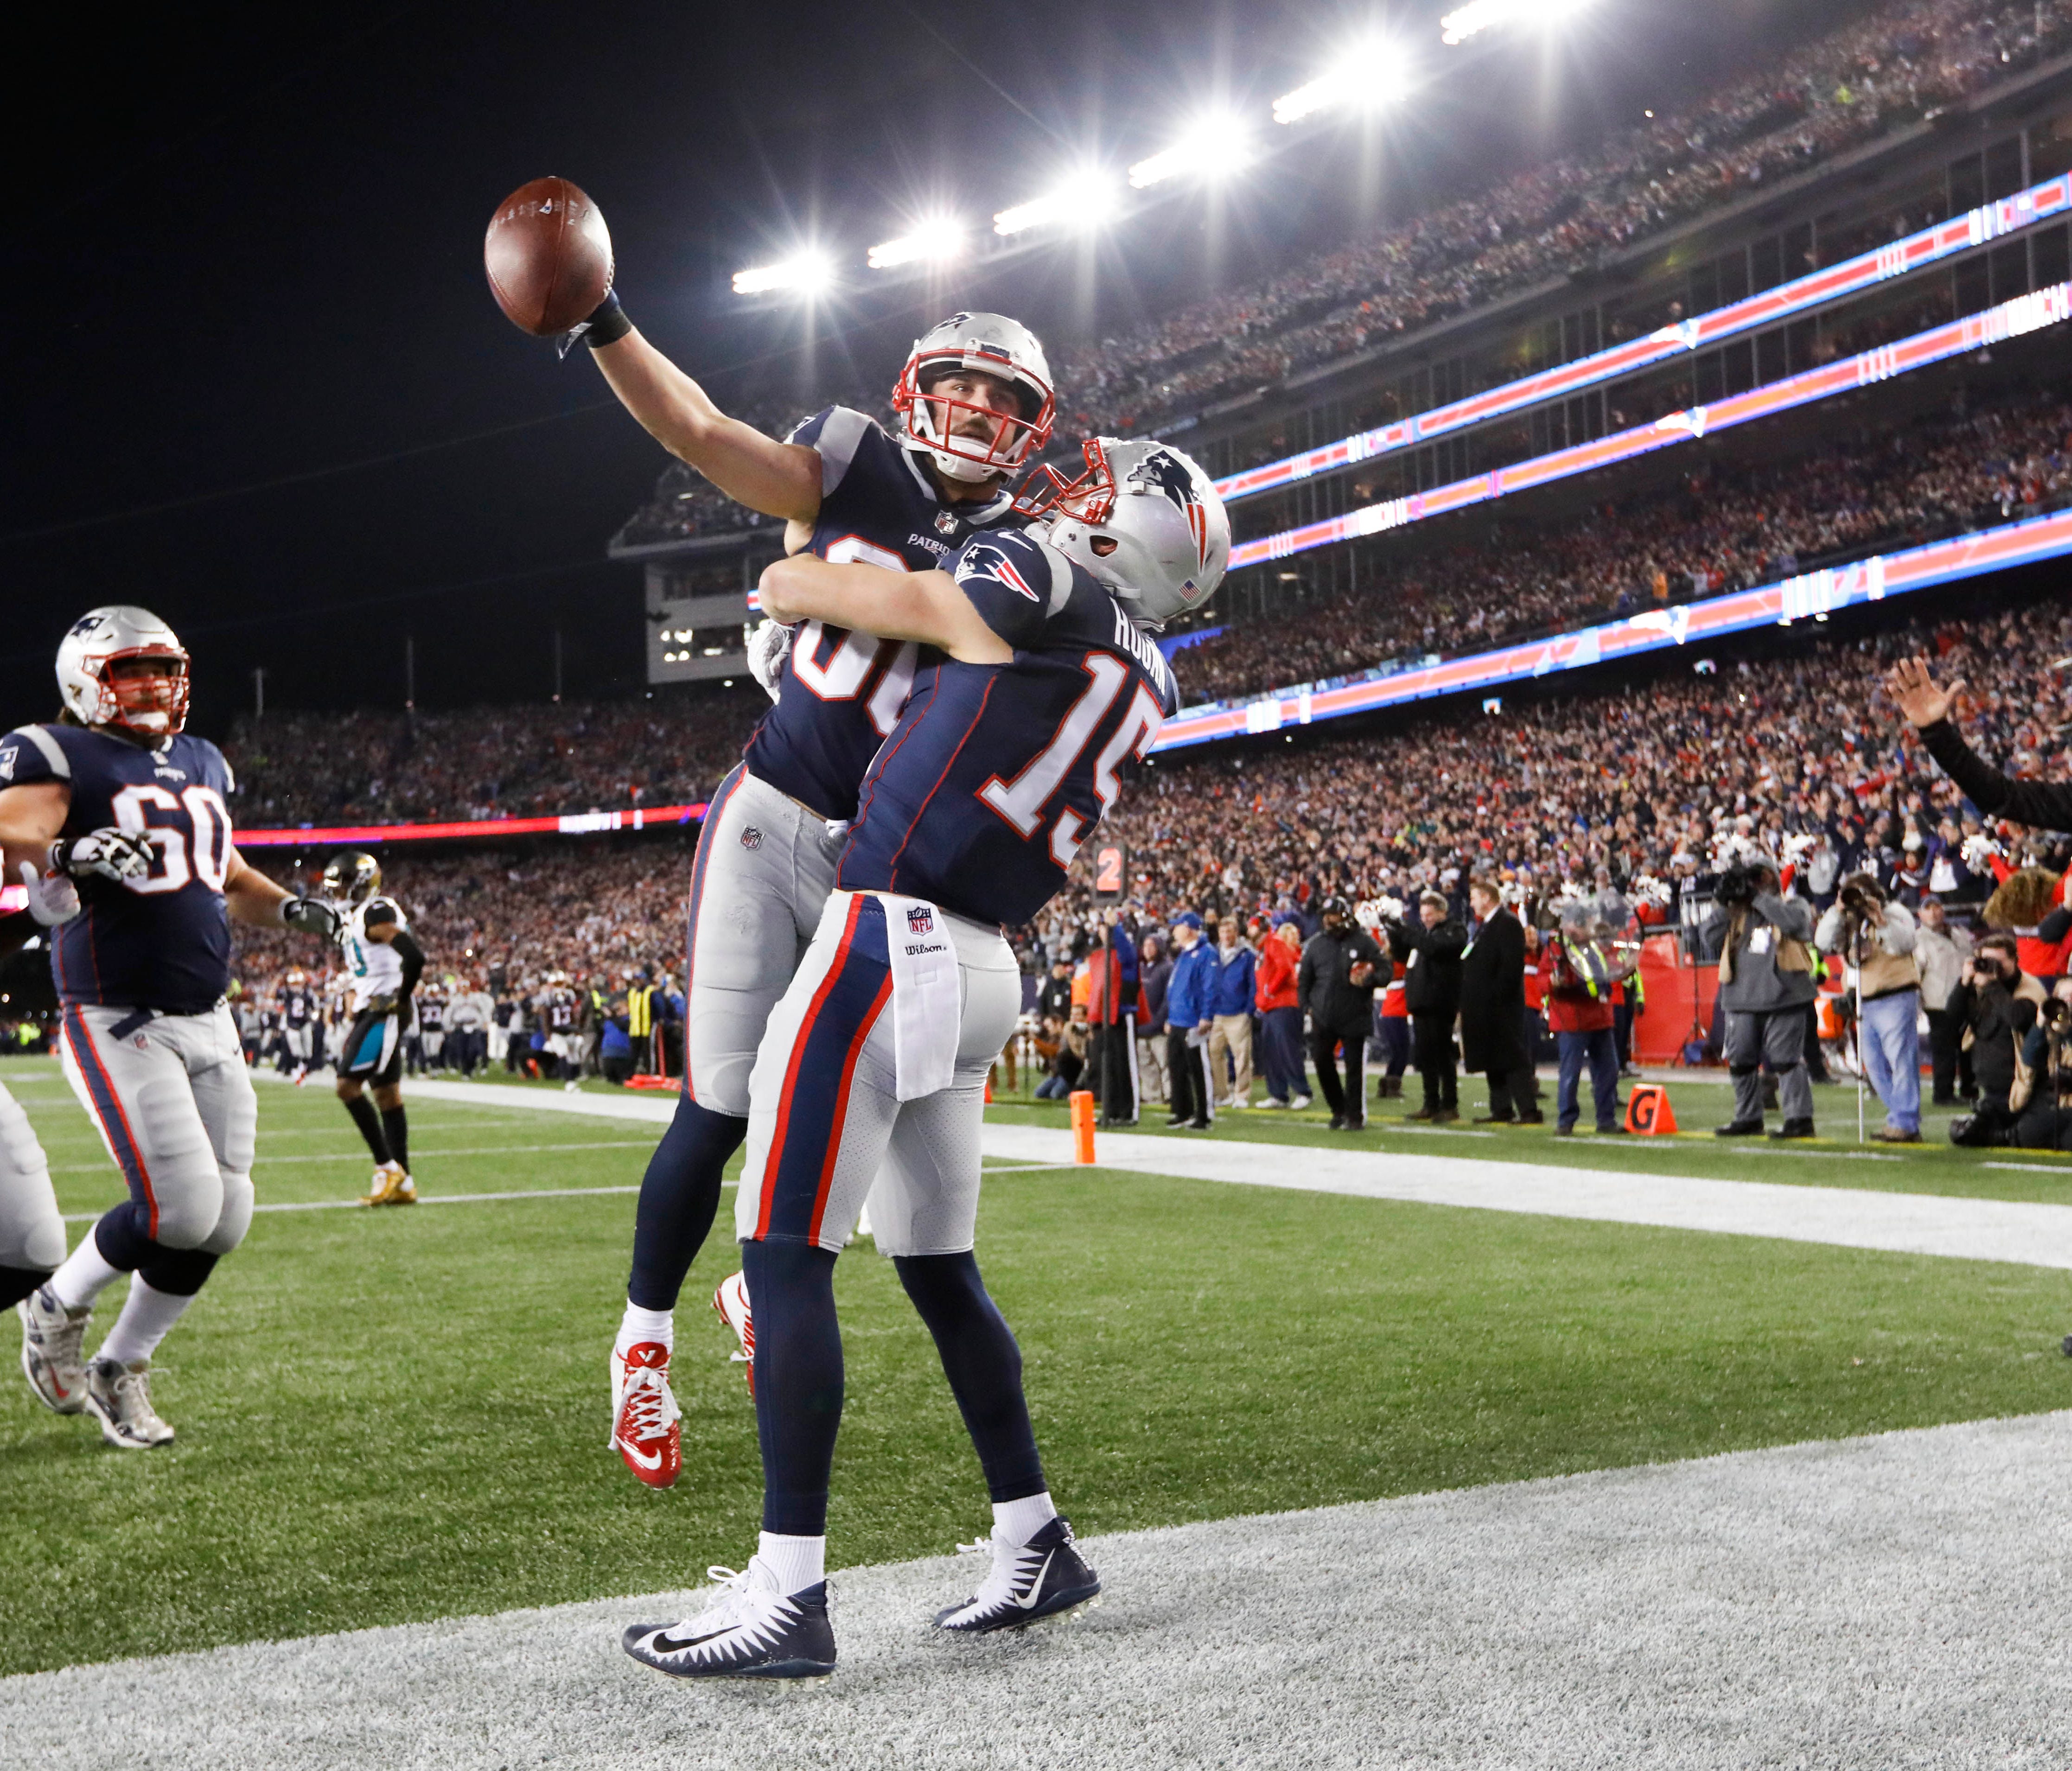 New England Patriots wide receiver Danny Amendola (80) celebrates his touchdown with wide receiver Chris Hogan (15) during the fourth quarter against the Jacksonville Jaguars in the AFC Championship Game at Gillette Stadium.